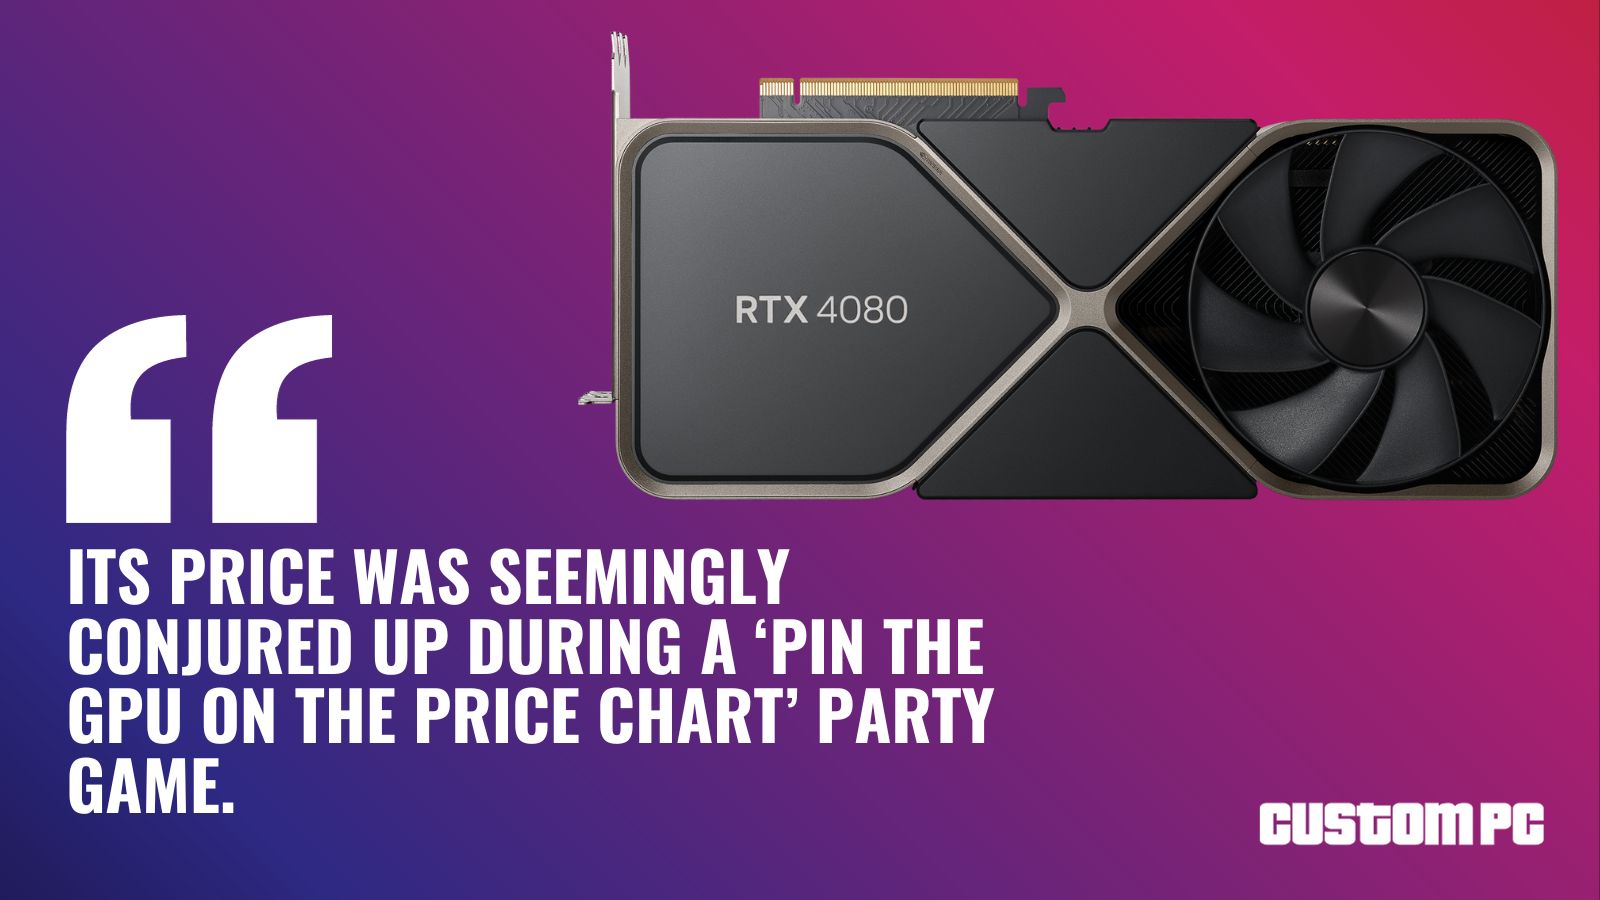 Nvidia GeForce RTX 4080 deserves the trash: Pin the GPU on the price chart game quote